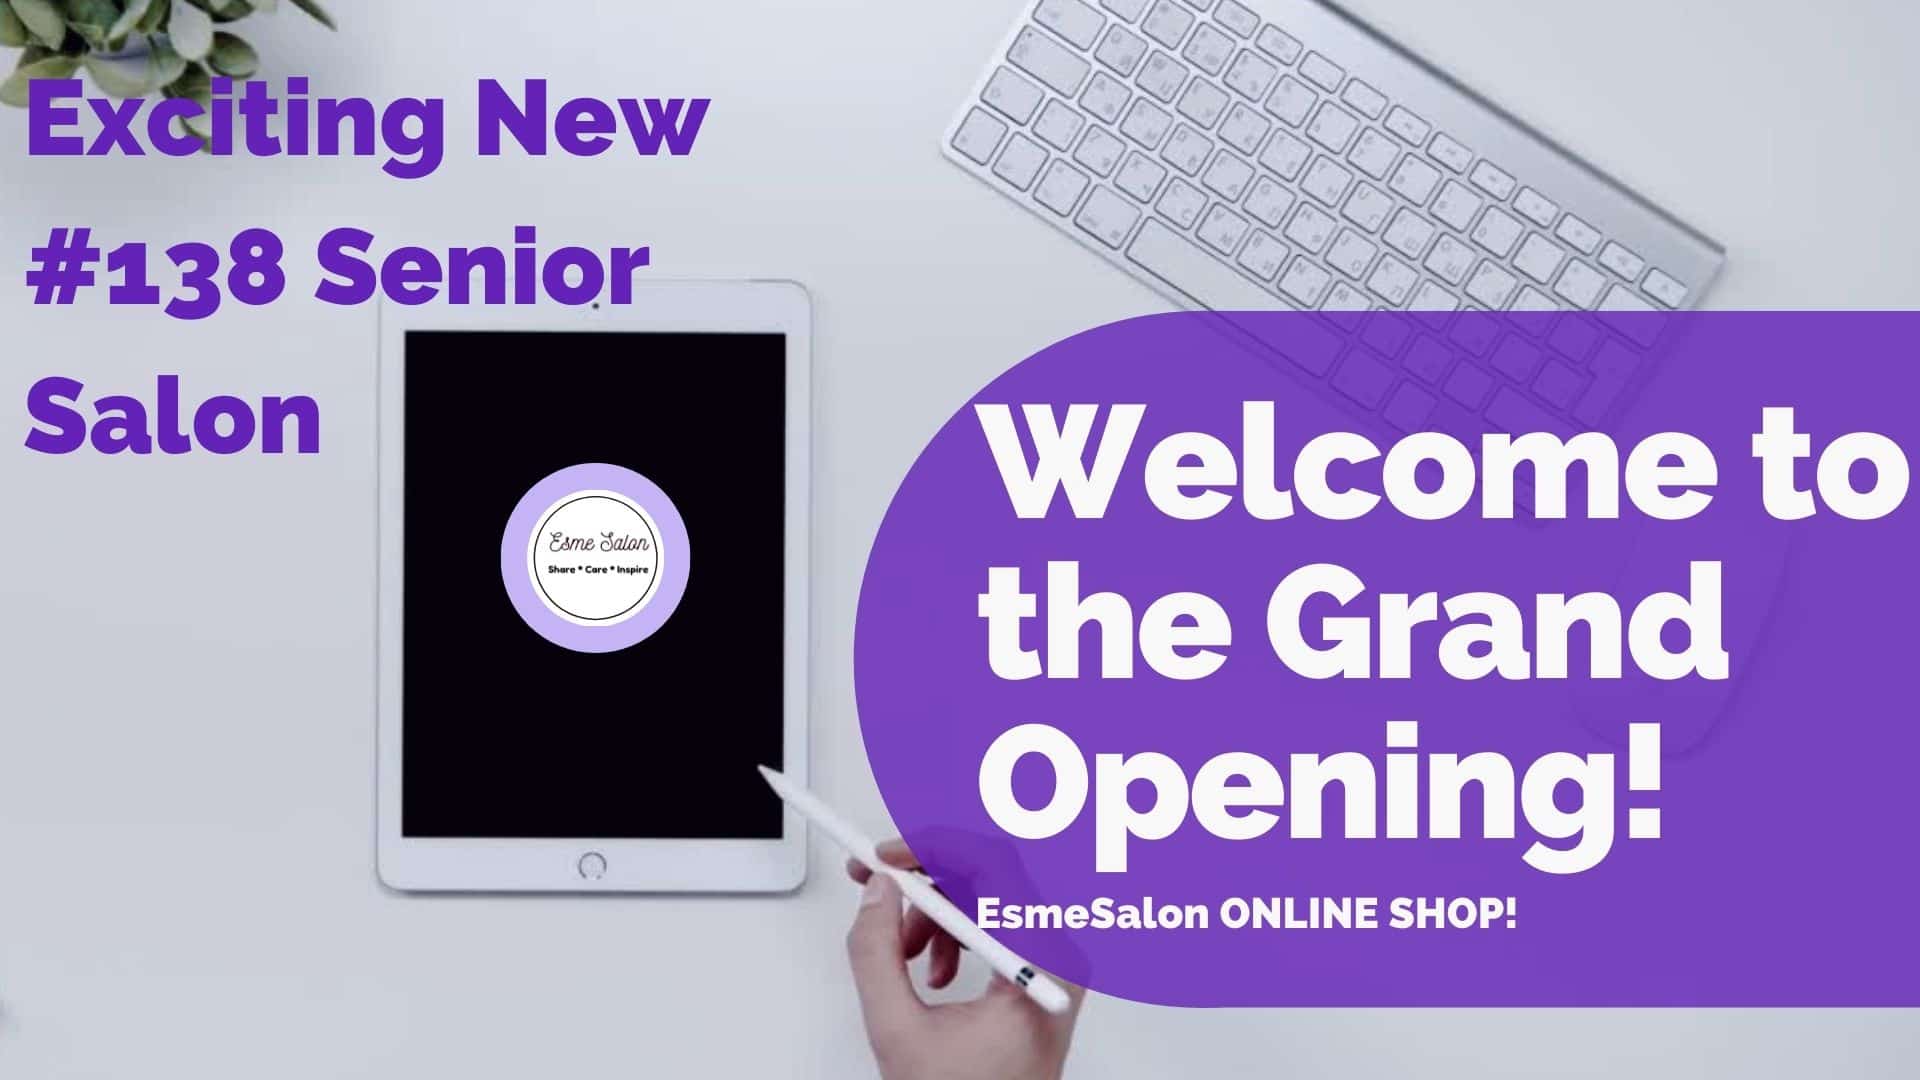 white keyboard and iPad with black screen and purple sign to welcome all to grand opening of online shop